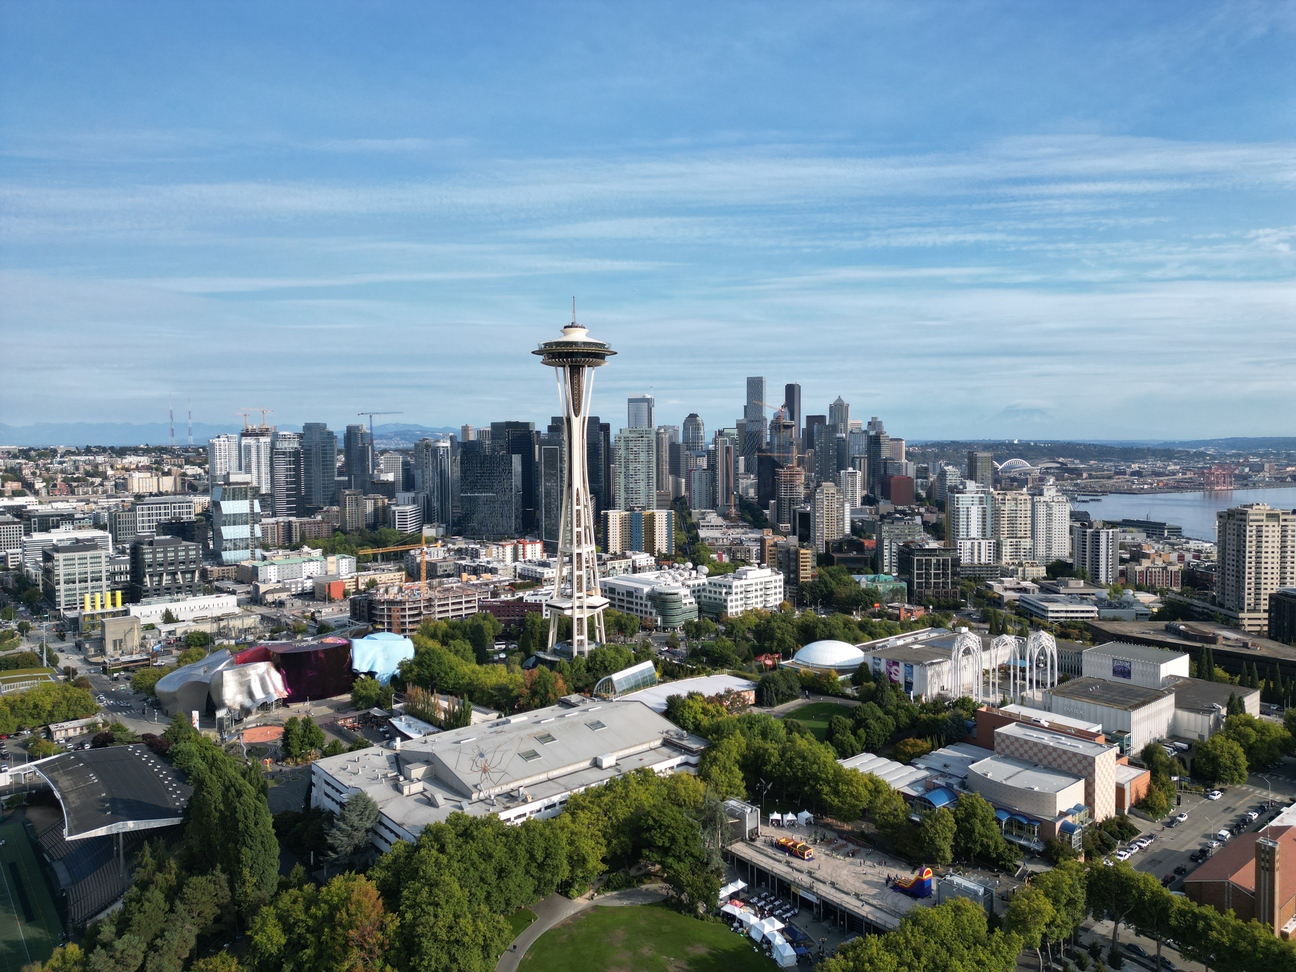 Seattle Center, seen from the air